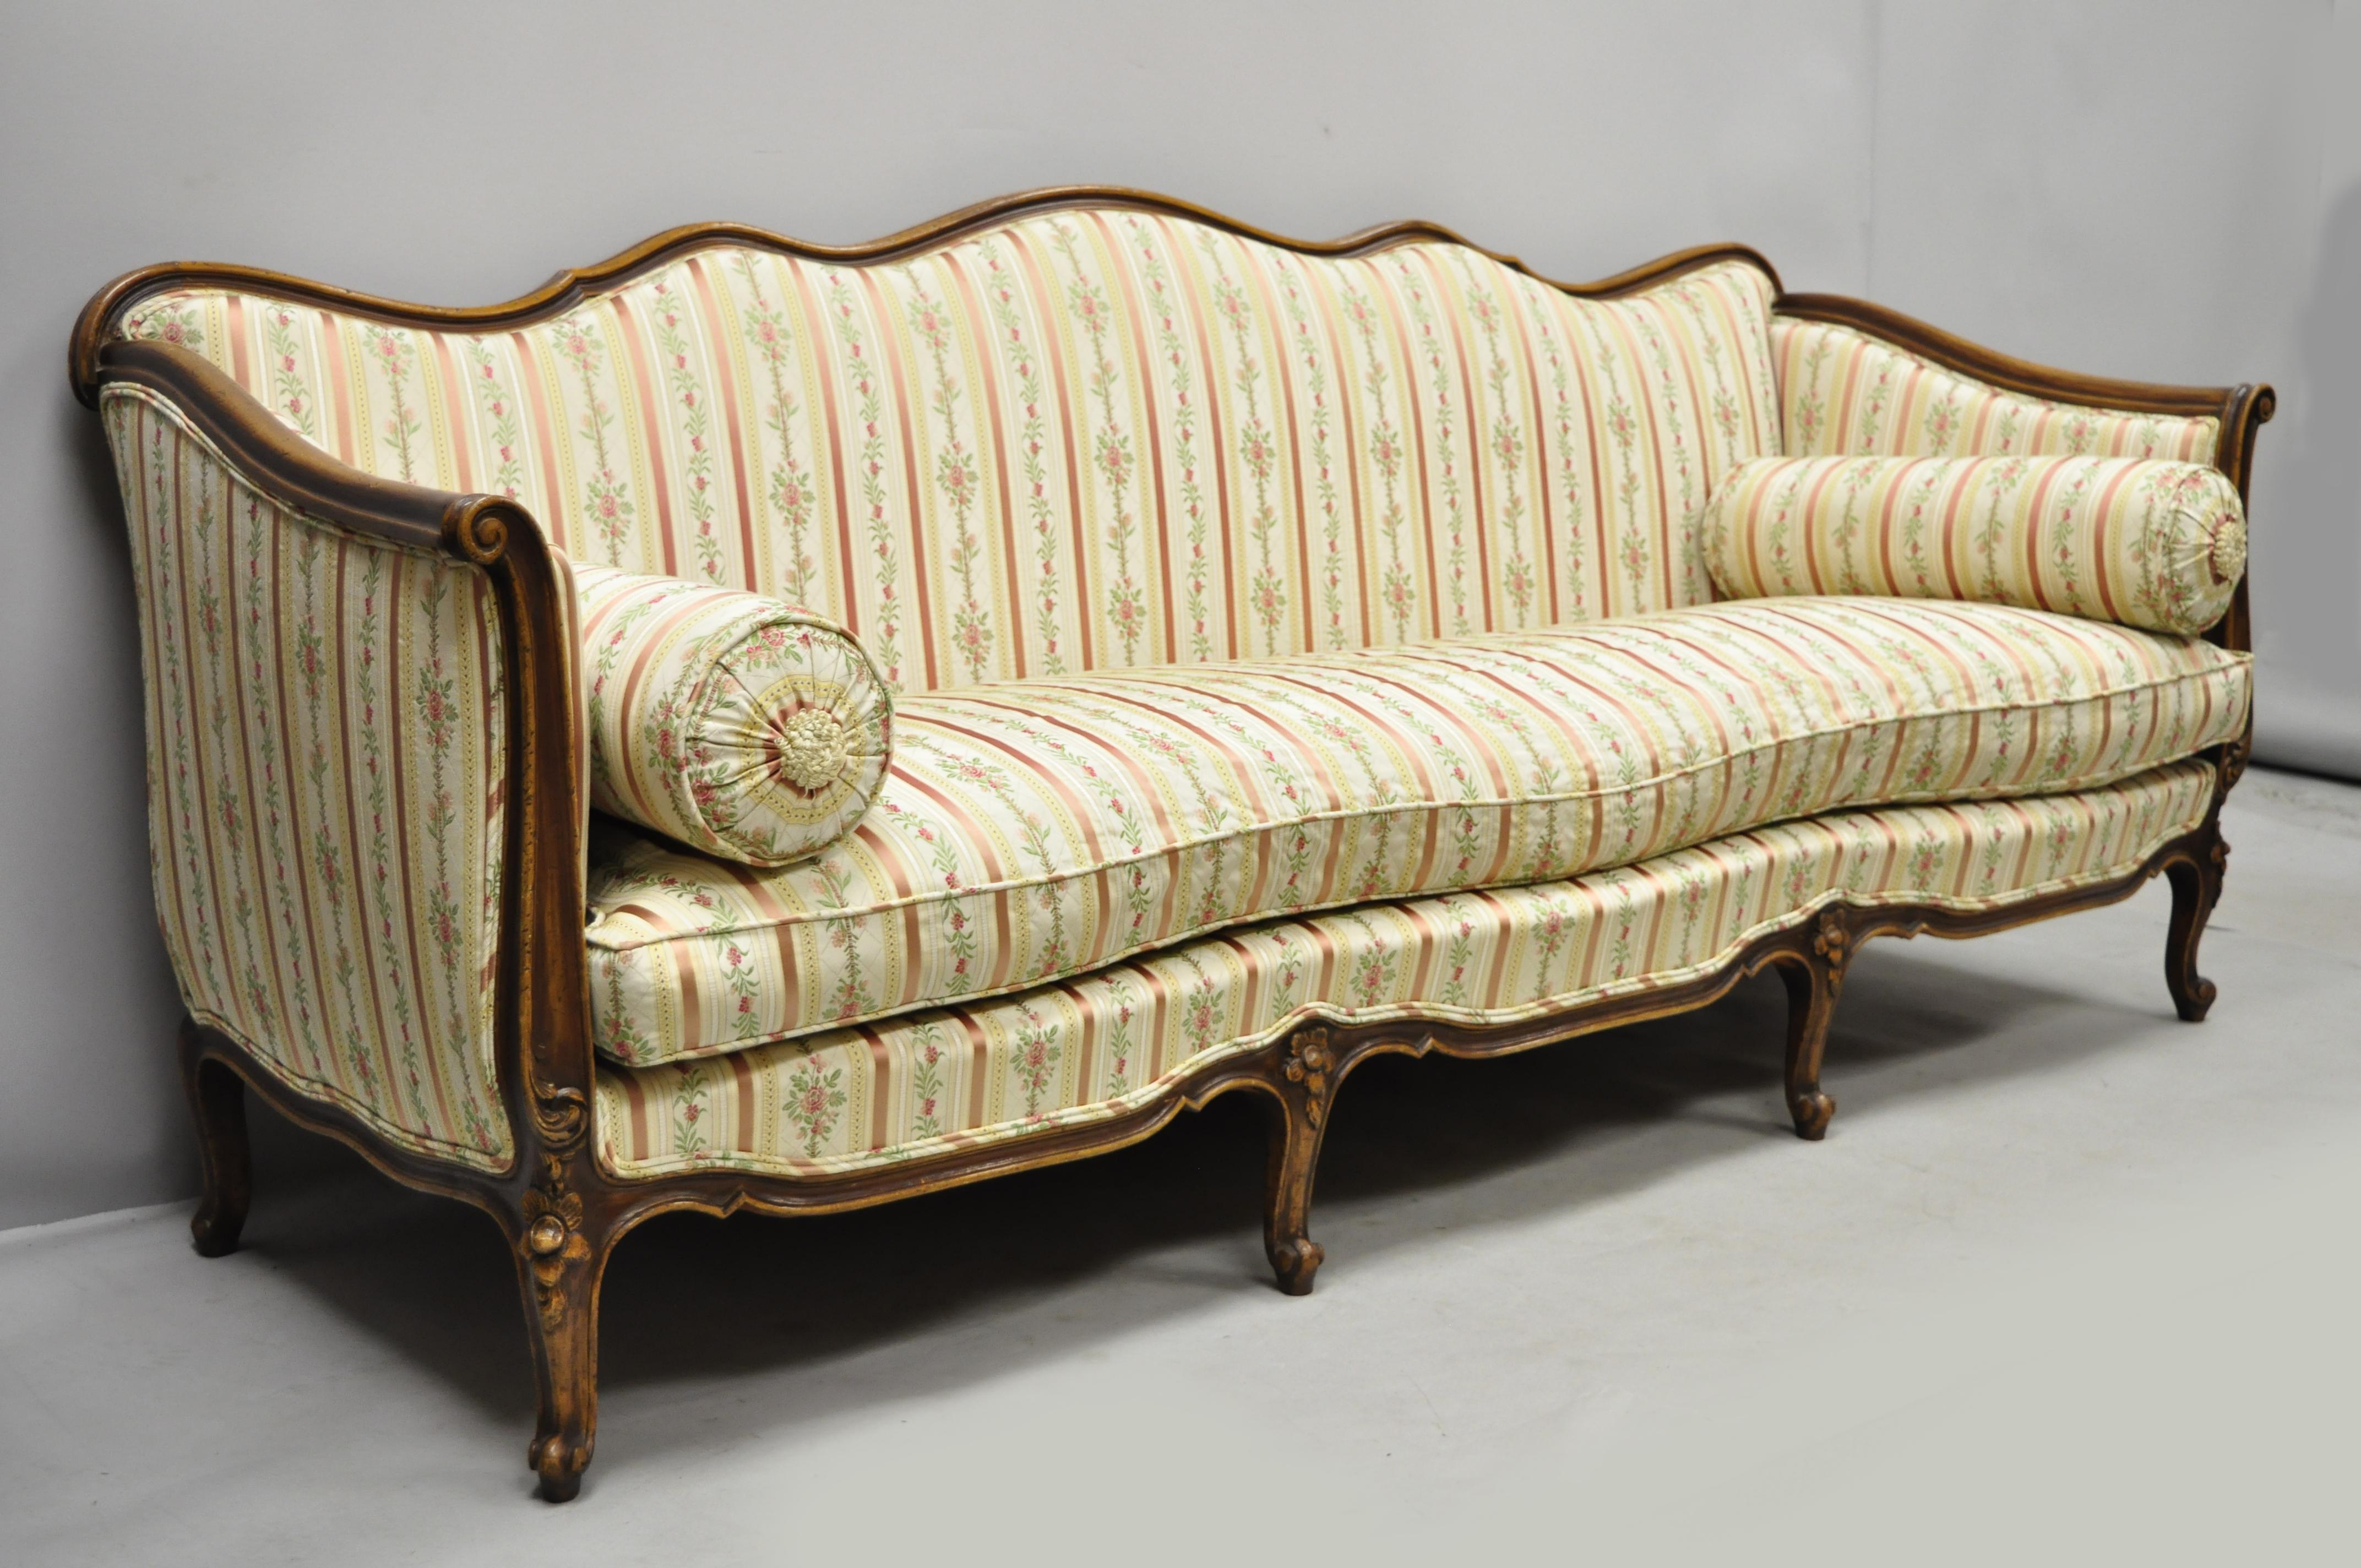 Early 20th century French Louis XV Provincial style sofa with serpentine carved back originally sold by W & J Sloane. Made in Italy. Item features serpentine carved rails, pink striped silk upholstery, solid wood frame, beautiful wood grain,